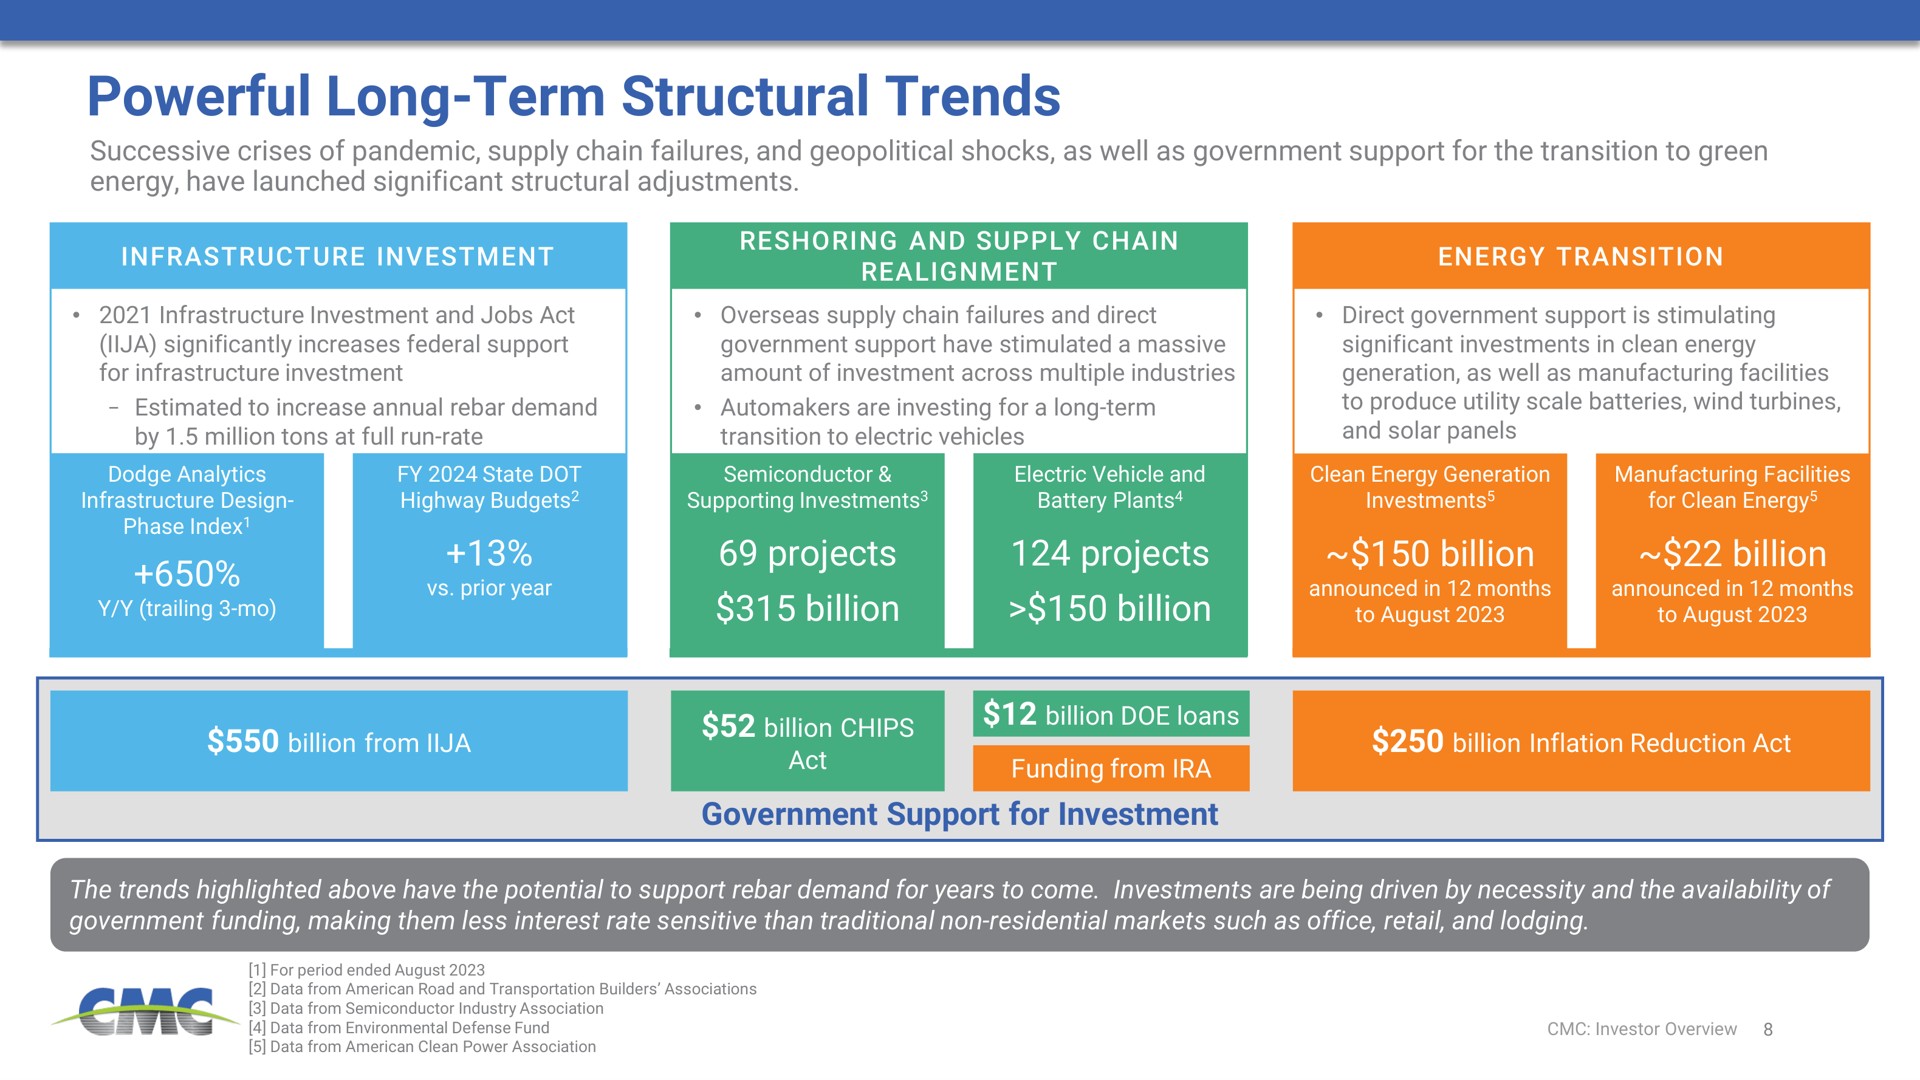 powerful long term structural trends projects billion projects billion billion billion government support for investment | Commercial Metals Company